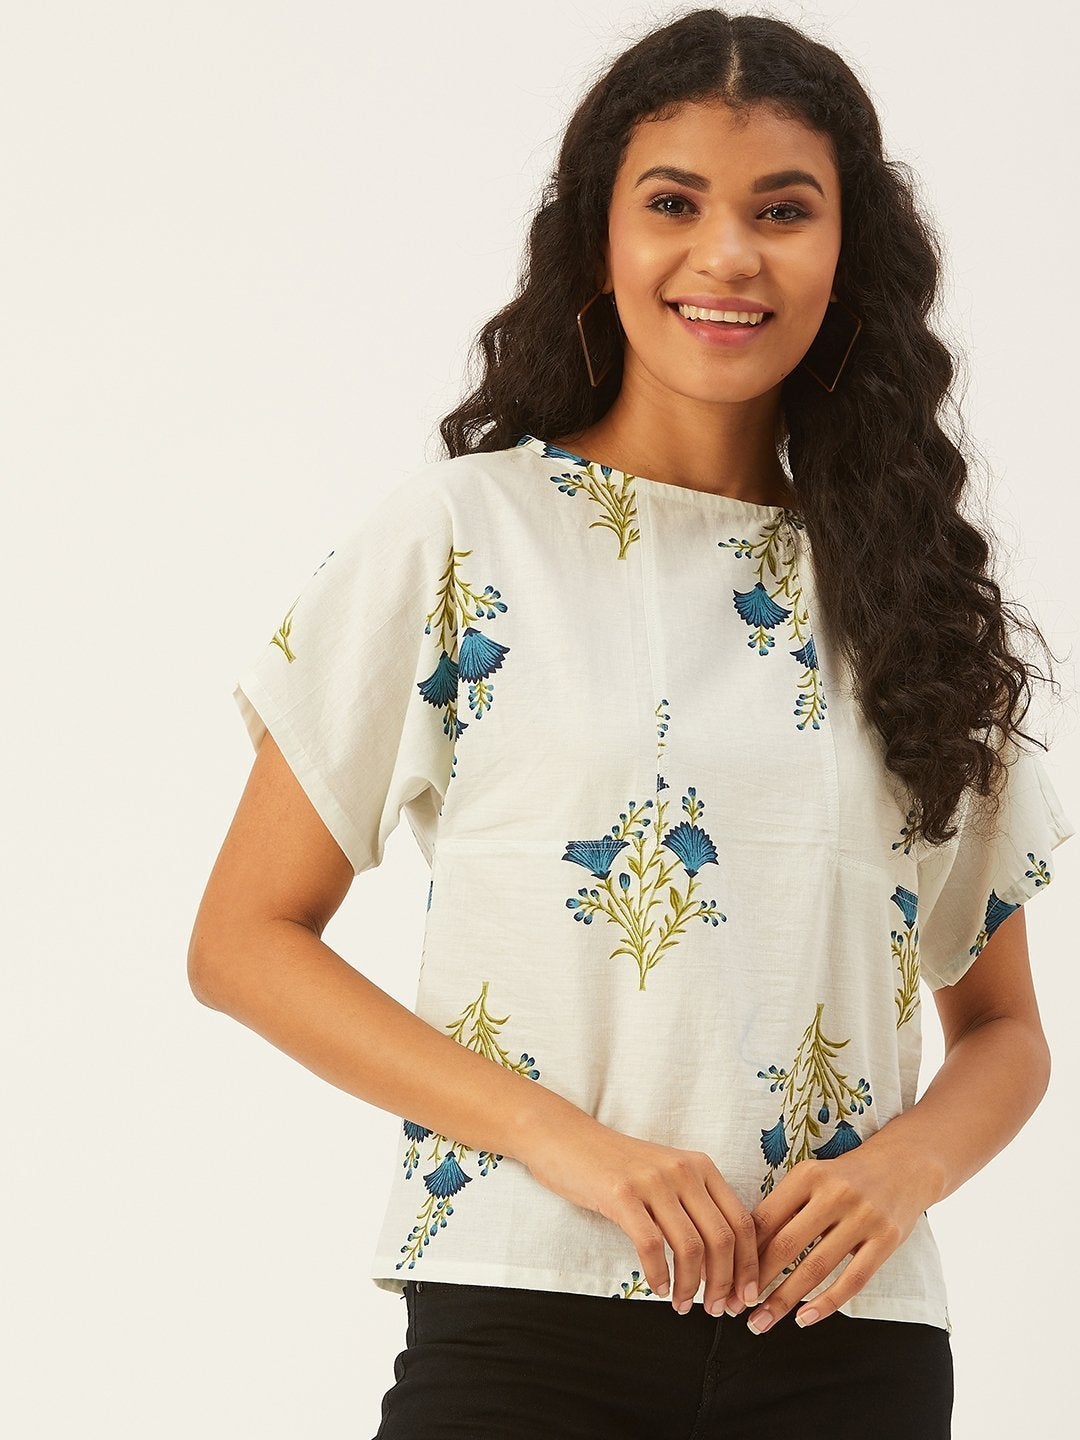 Women's White Top With Blue Floral Print - InWeave